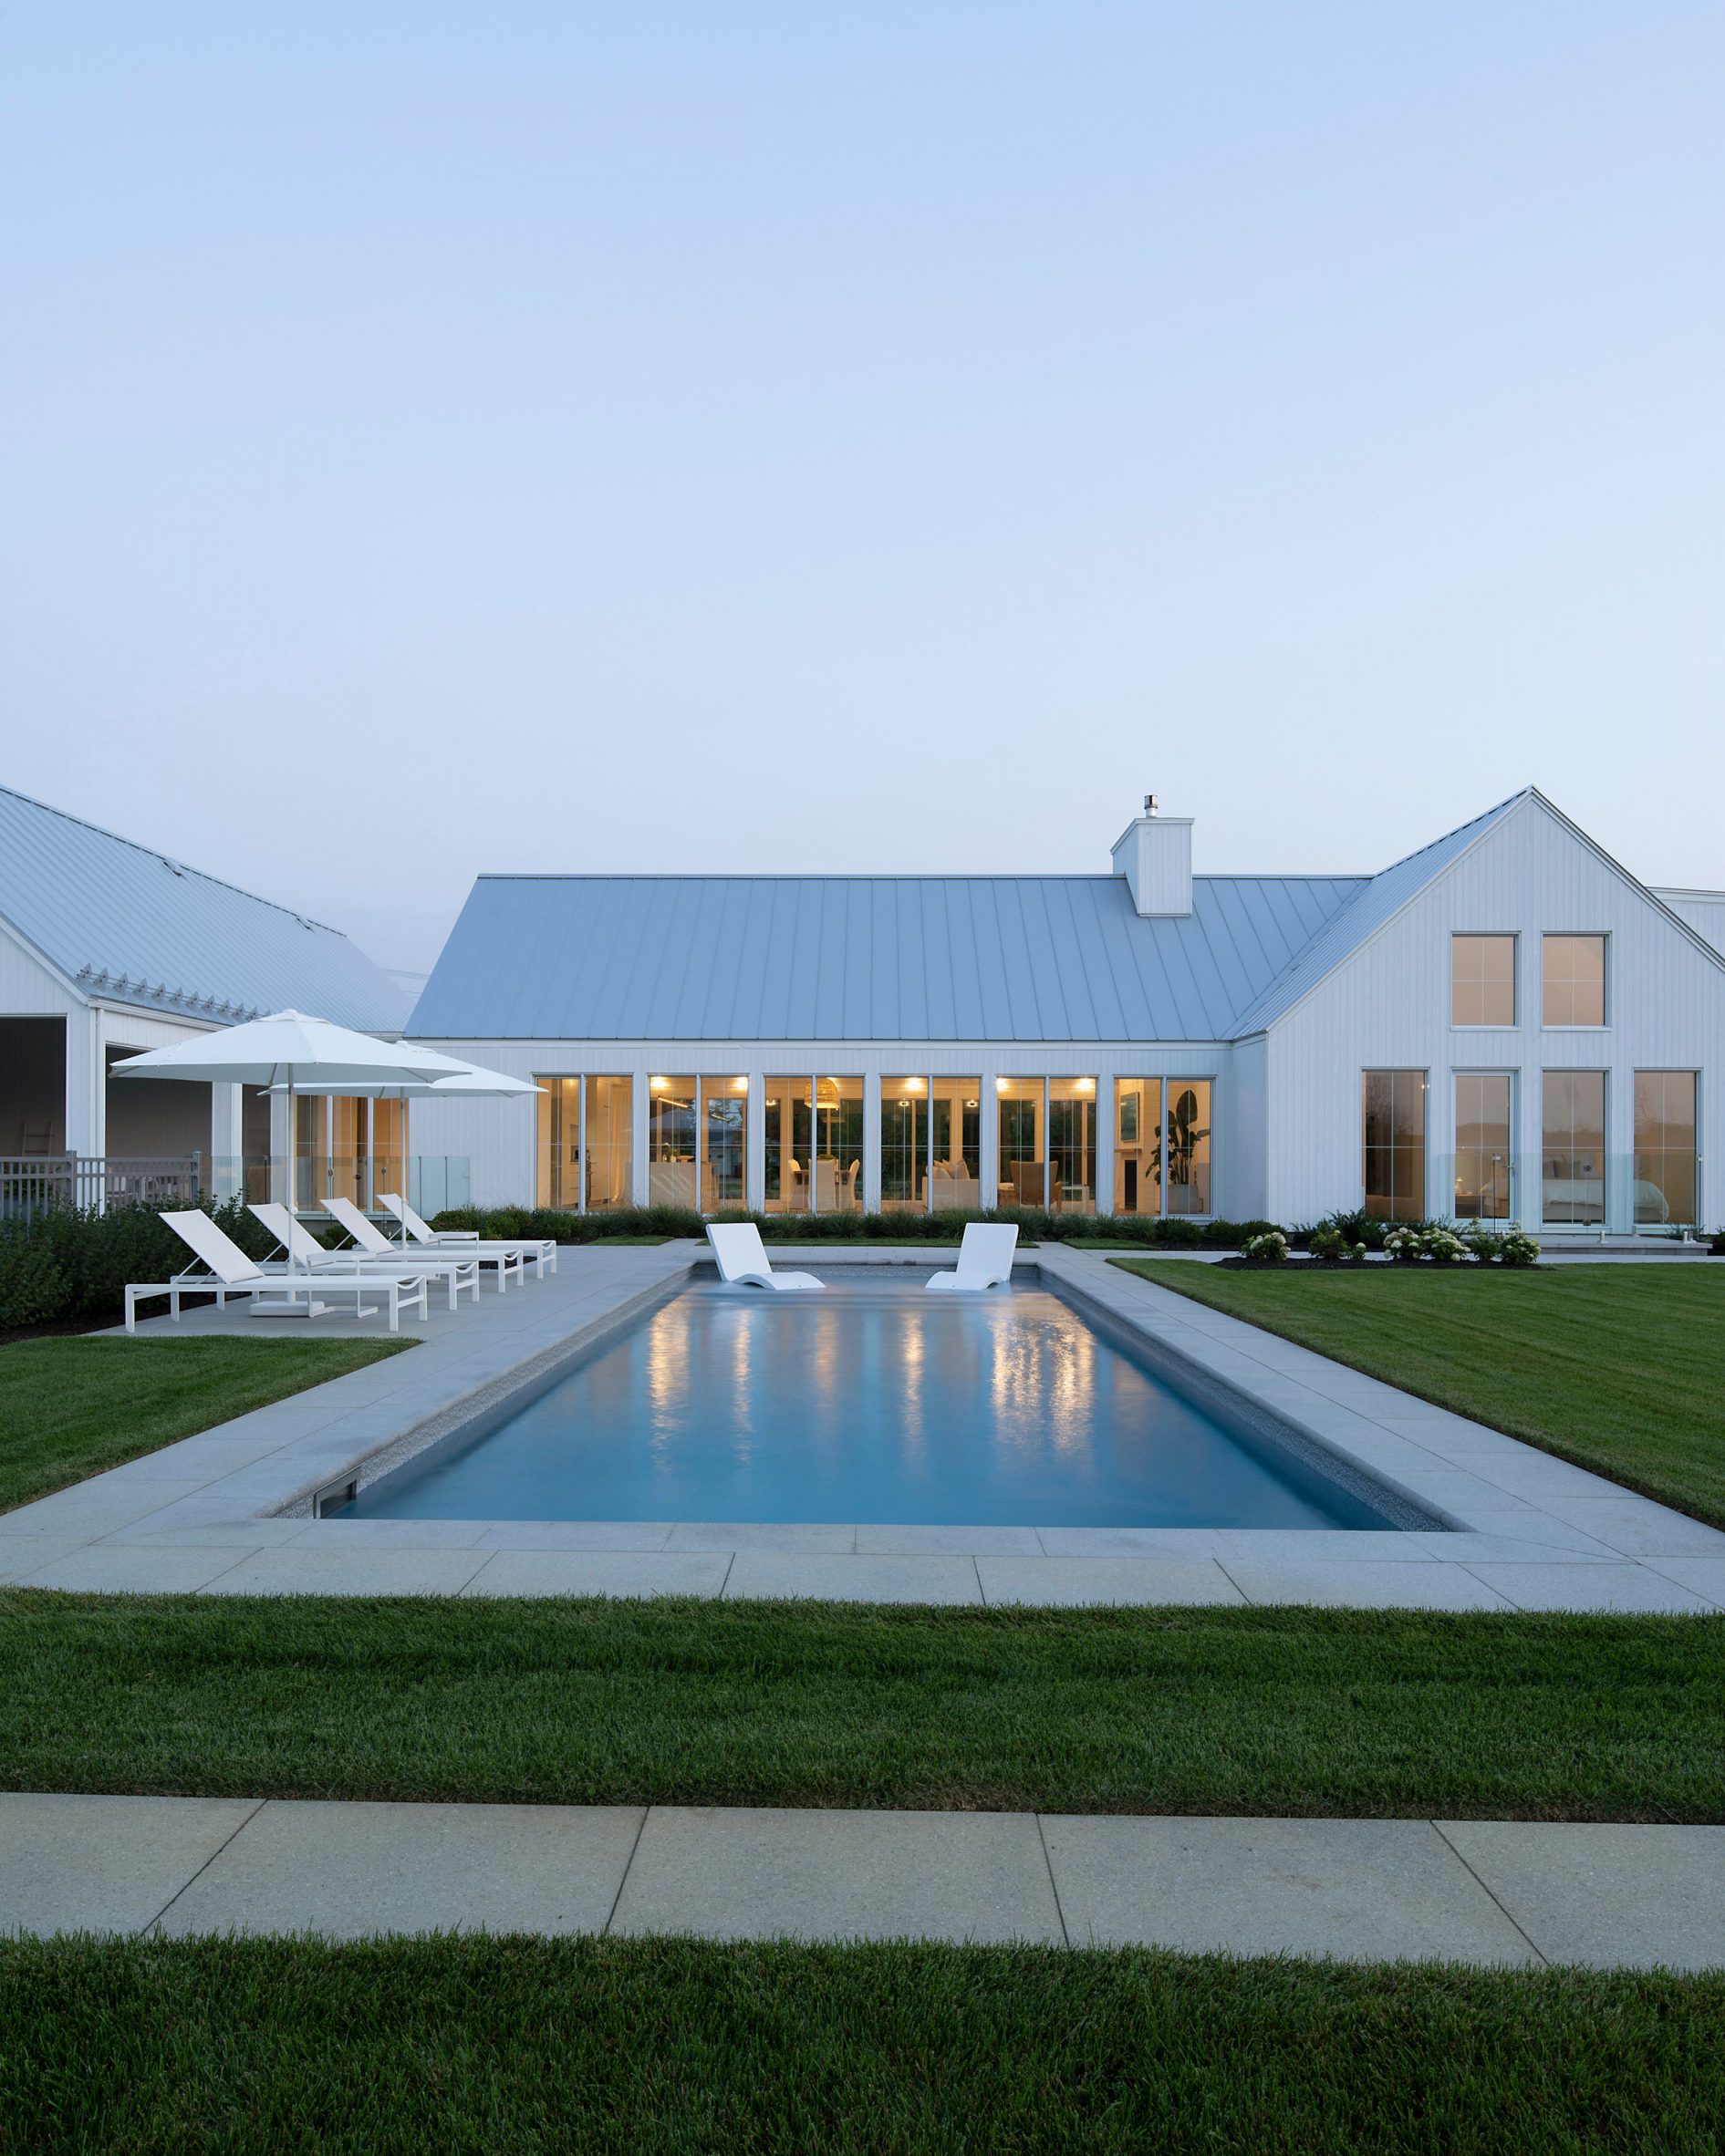 A white U-shaped house with a pitched roof on a green lawn with a swimming pool